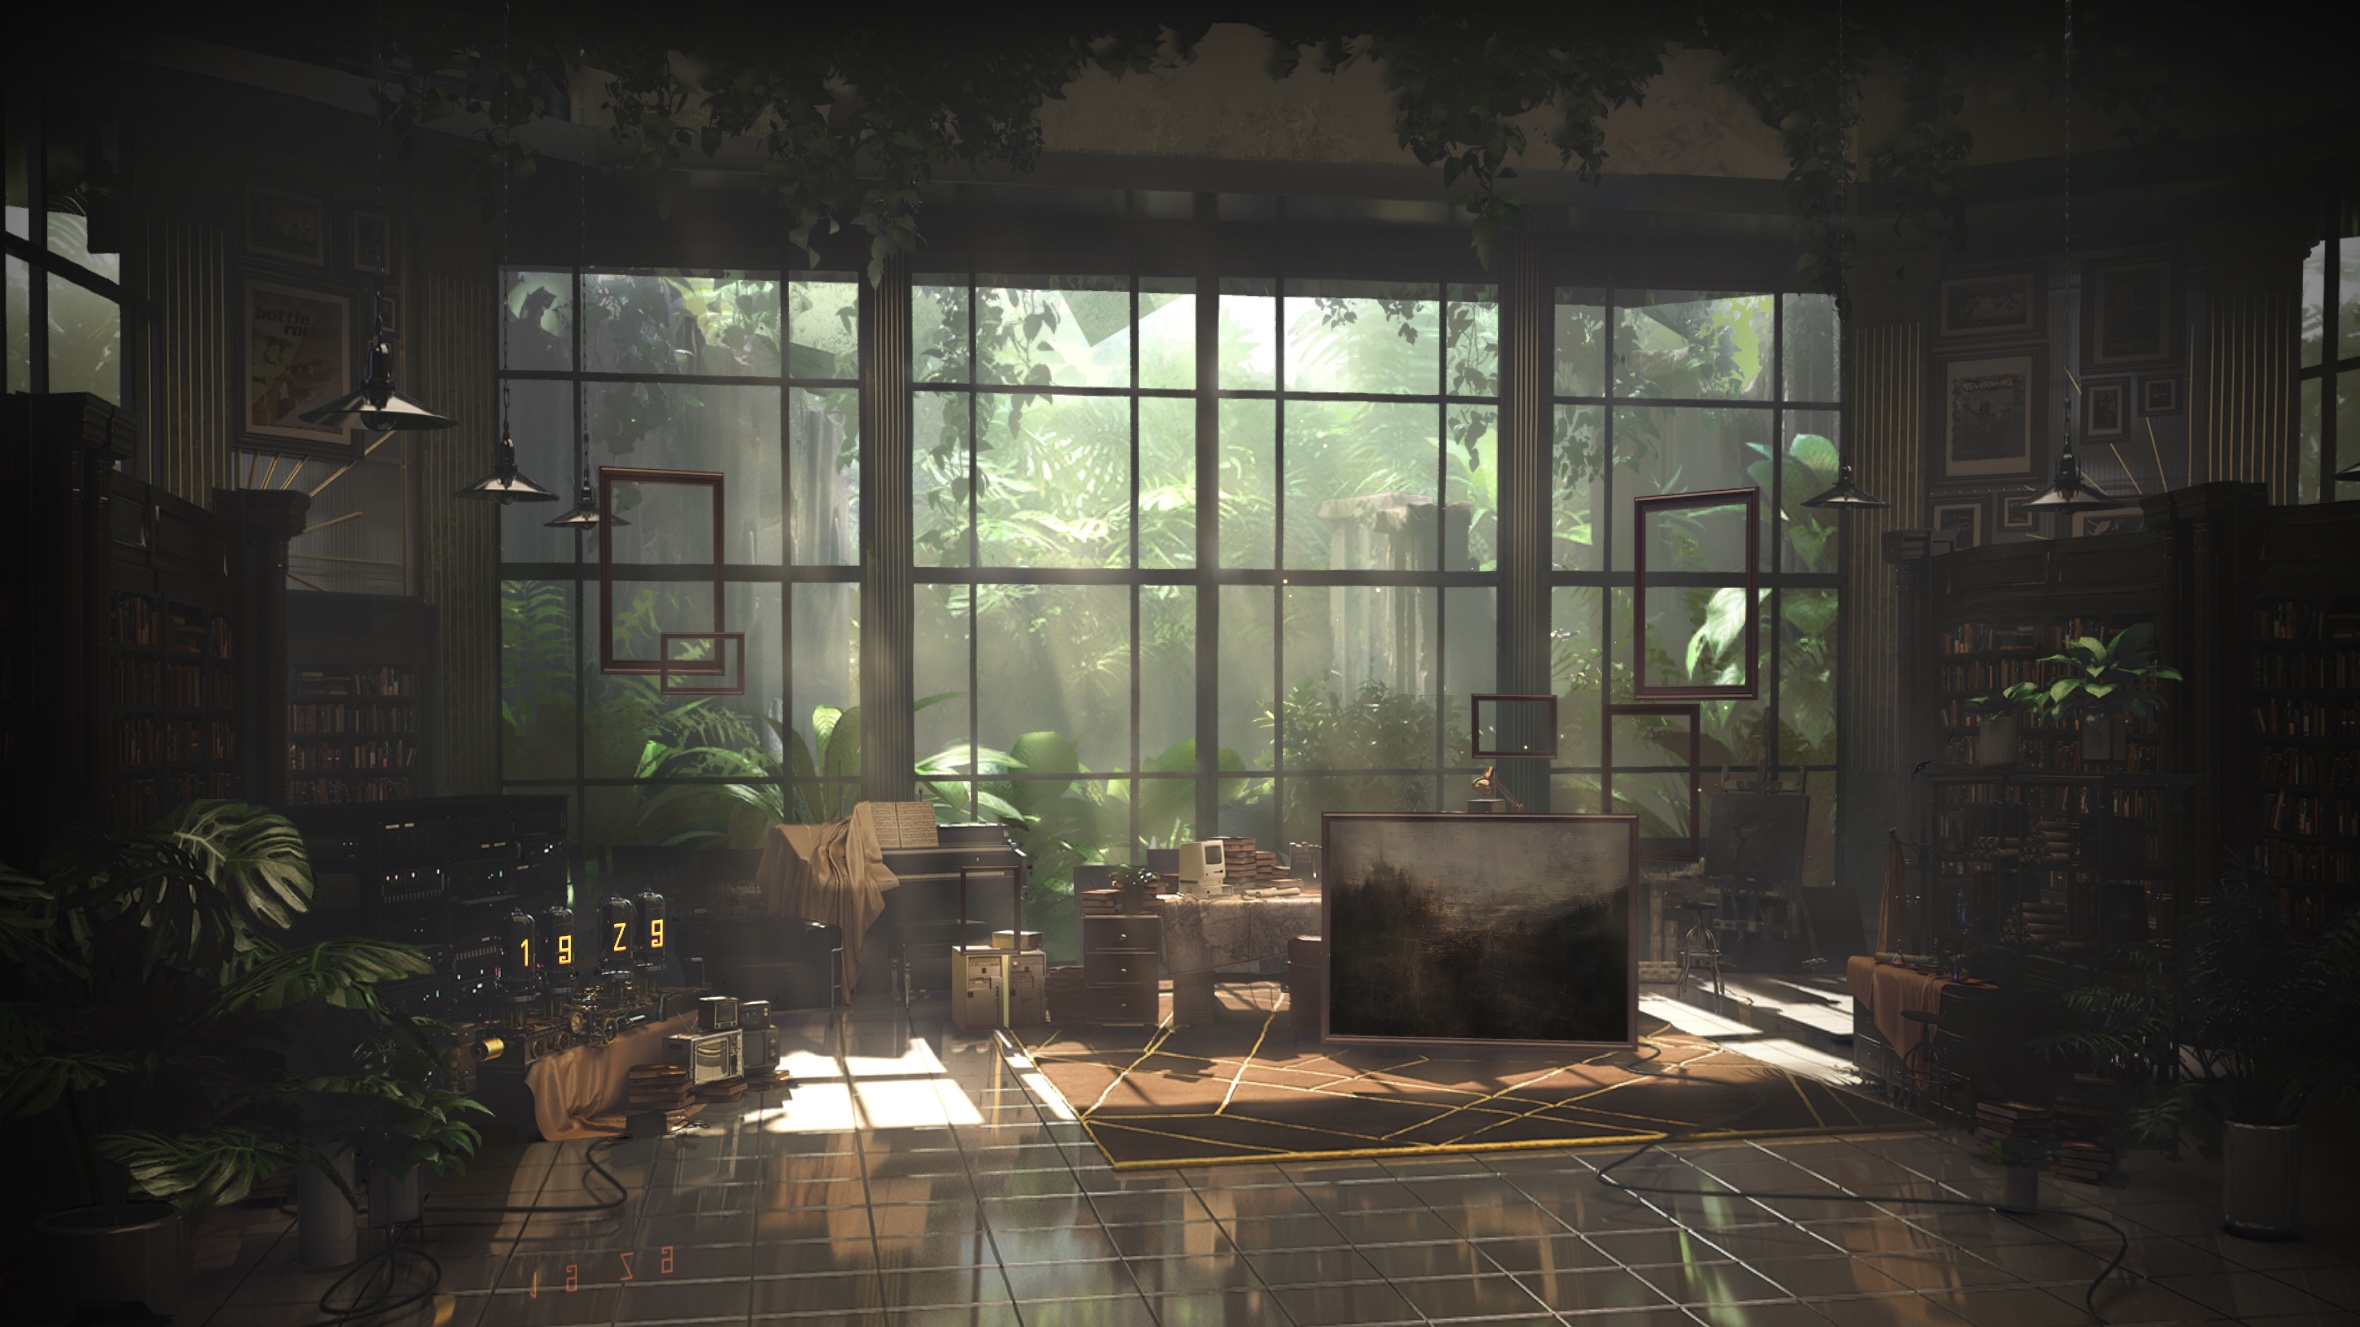 Reverse 1999 Room Interior Window Sunlight Chair Piano Musical Instrument Leaves Plants Reflection P 2360x1327